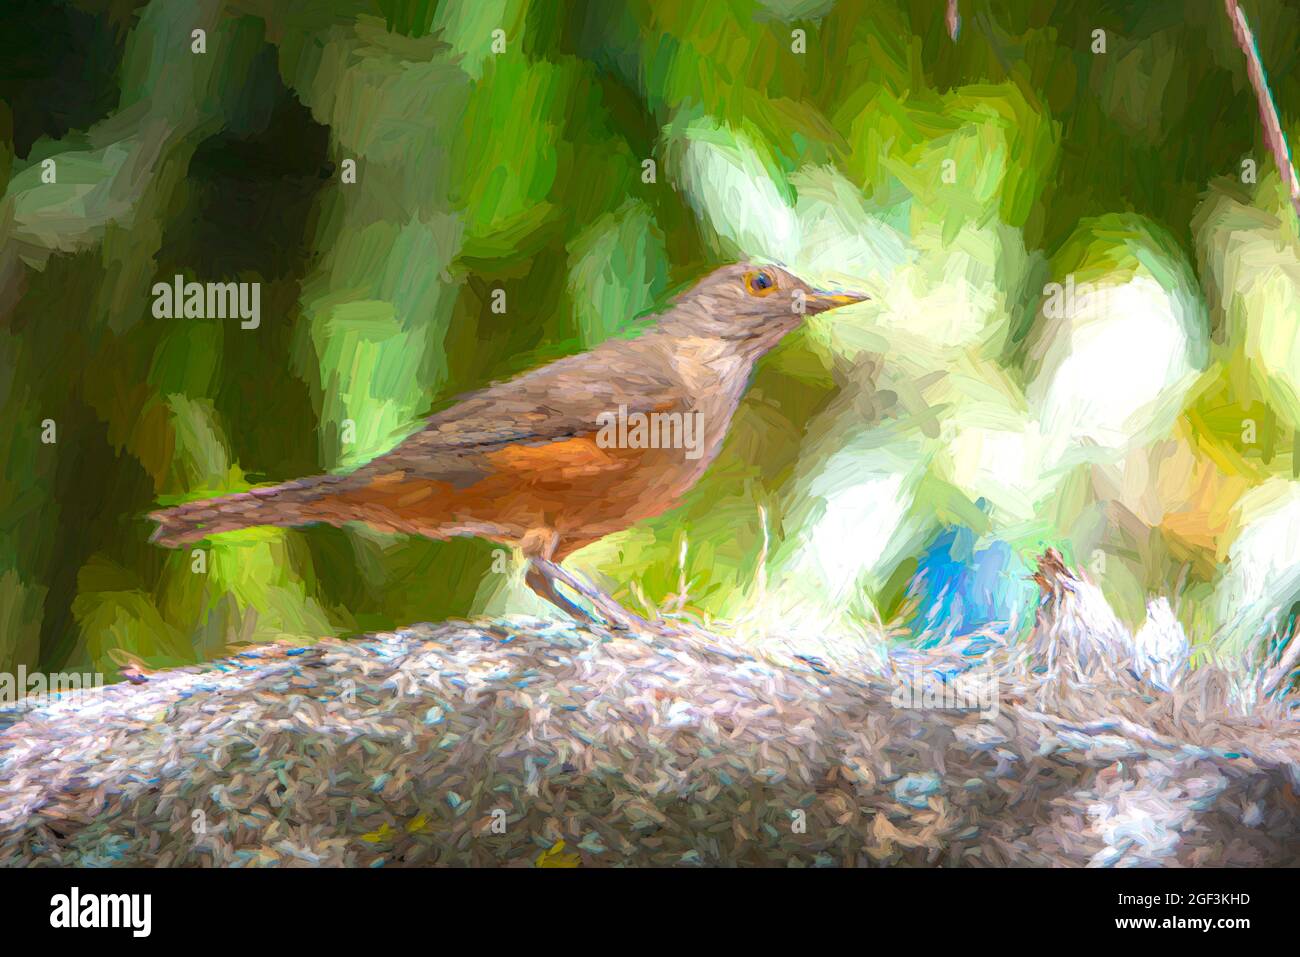 Digital Painting of a Rufous bauchlied Thrush on a Ast of a Tree. Stockfoto